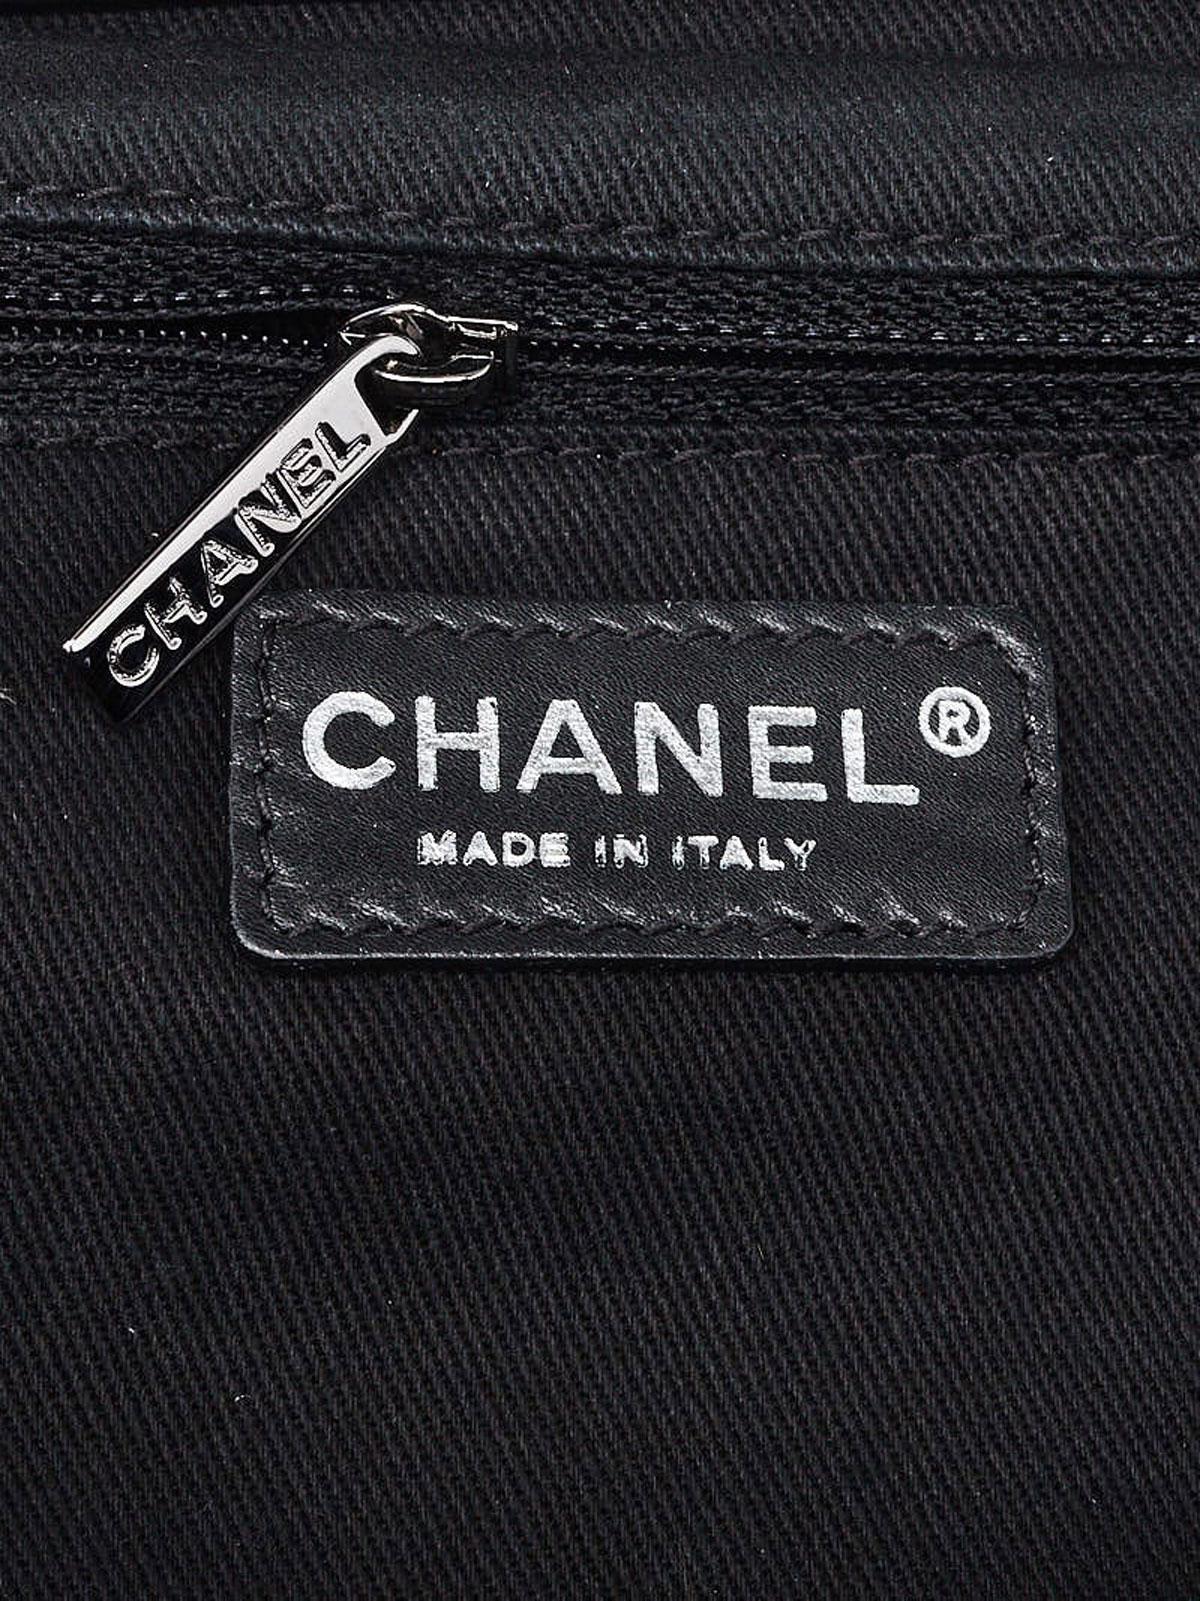 Chanel 2006 Small Patent Flap Bag Kiss lock Multi Compartment Shoulder Tote Bag For Sale 9